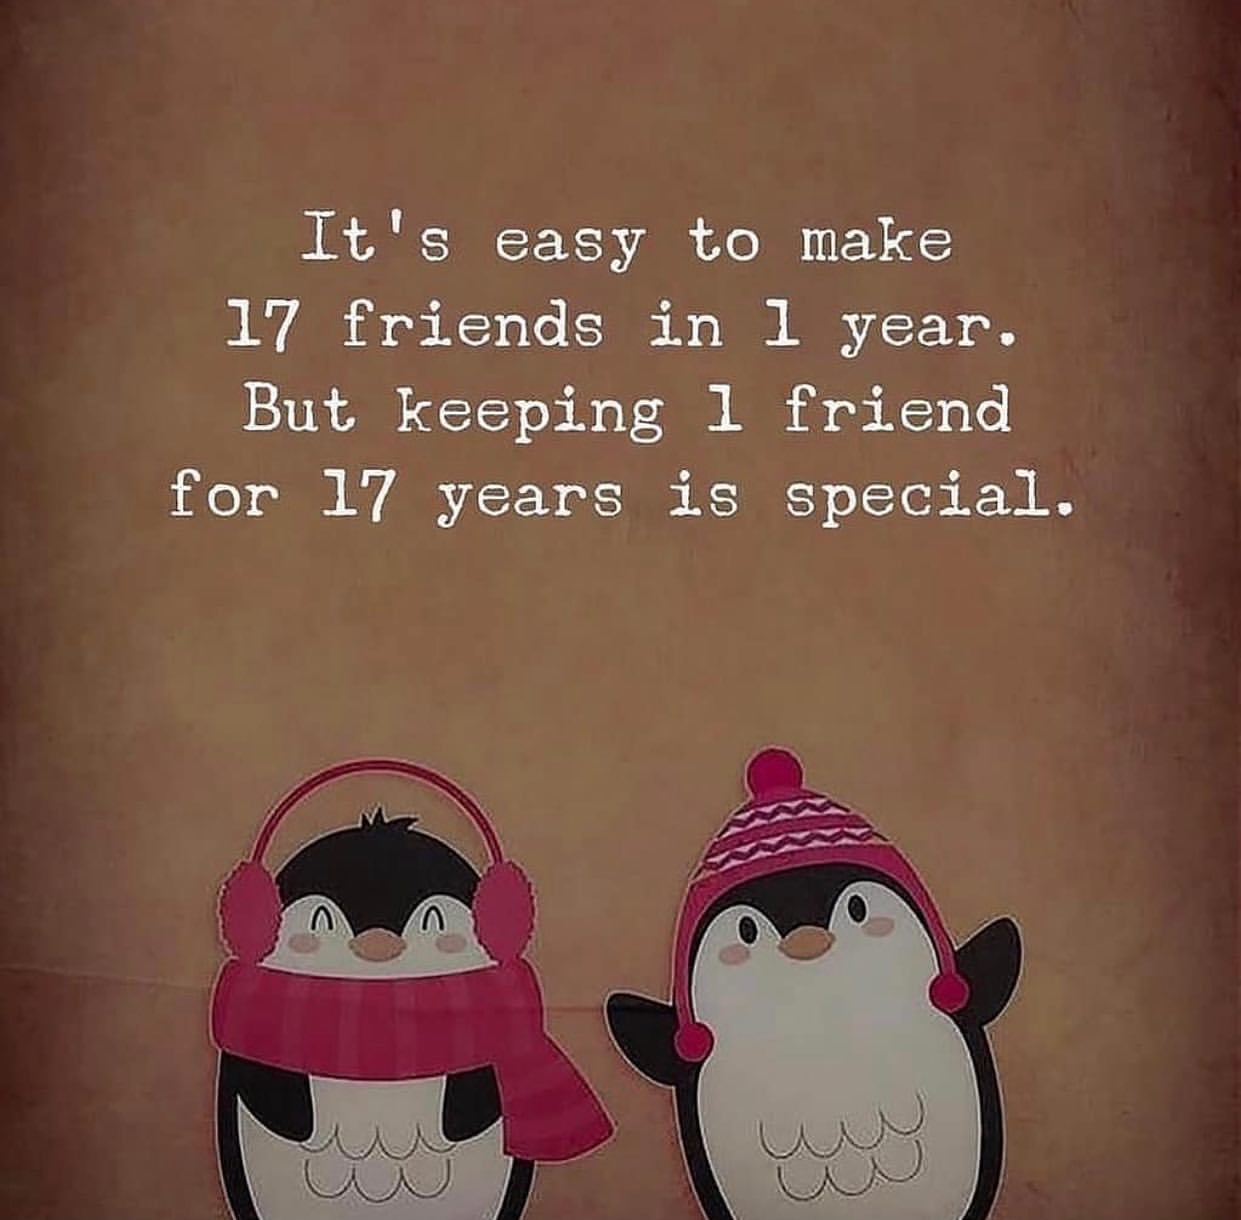 It's easy to make 17 friends in 1 year. But keeping 1 friend for 17 years is special.